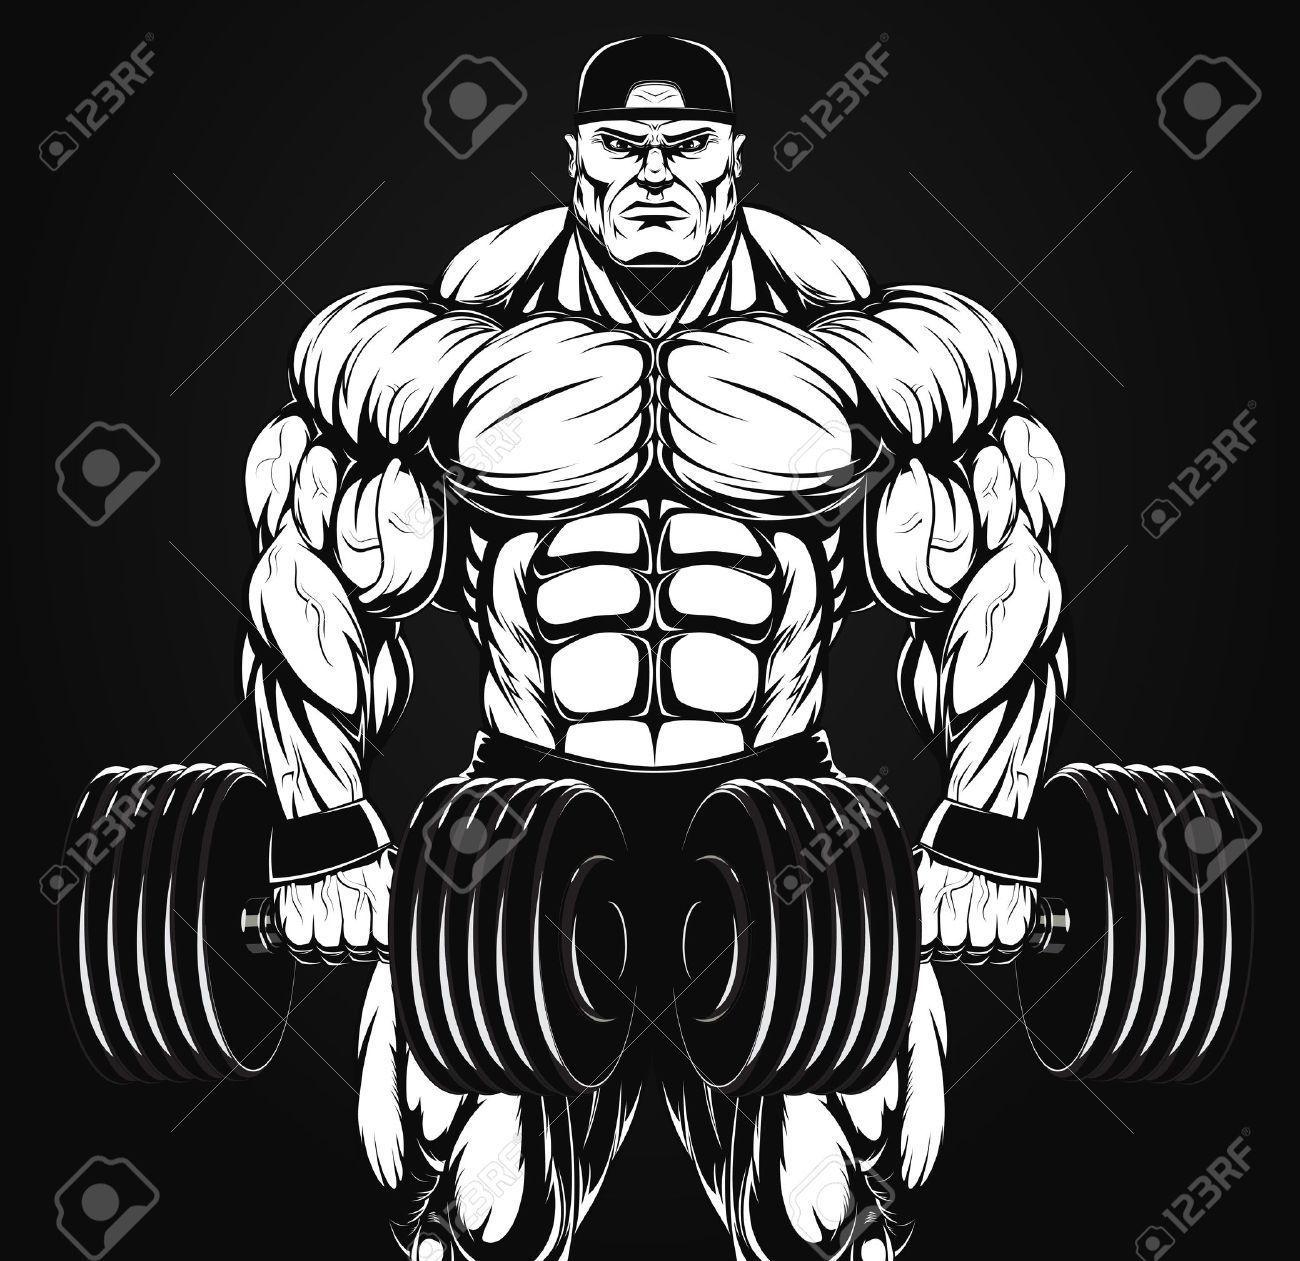 Animated Bodybuilder Wallpapers - Wallpaper Cave